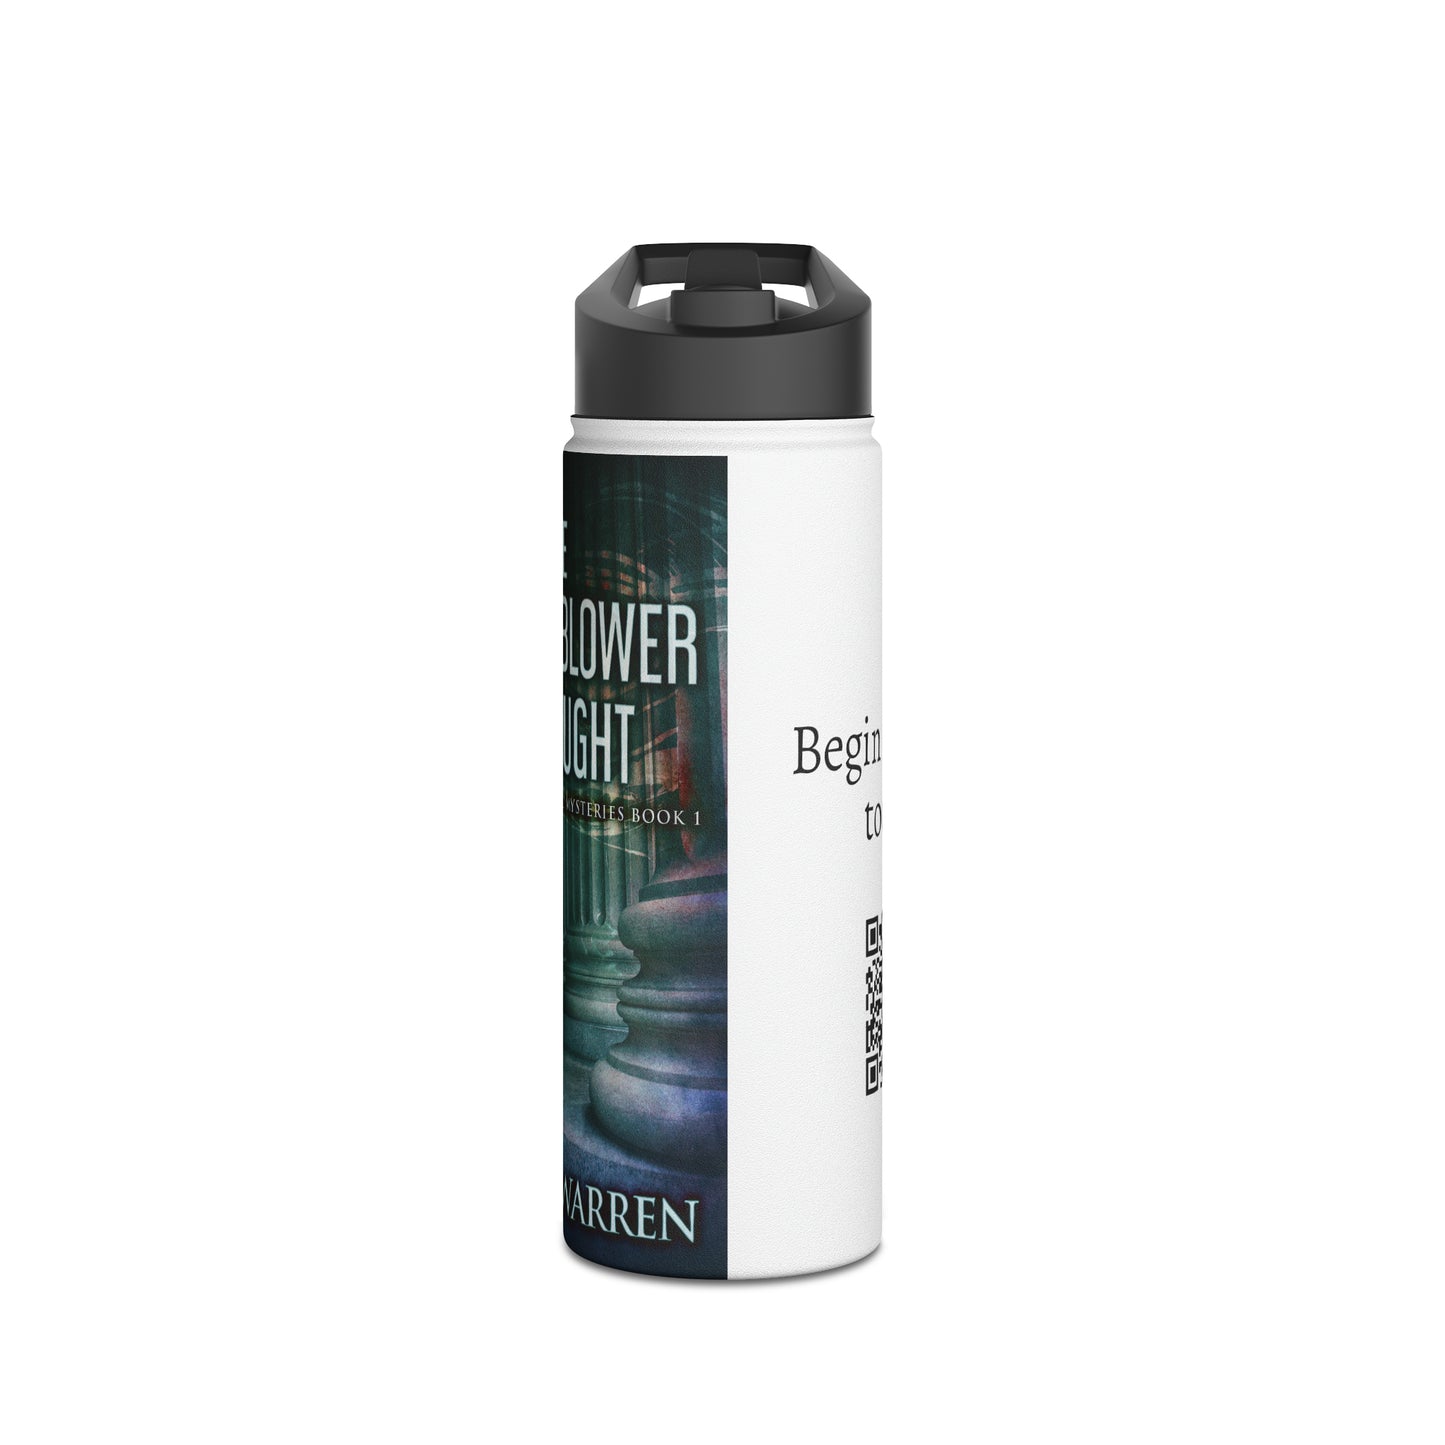 The Whistleblower Onslaught - Stainless Steel Water Bottle